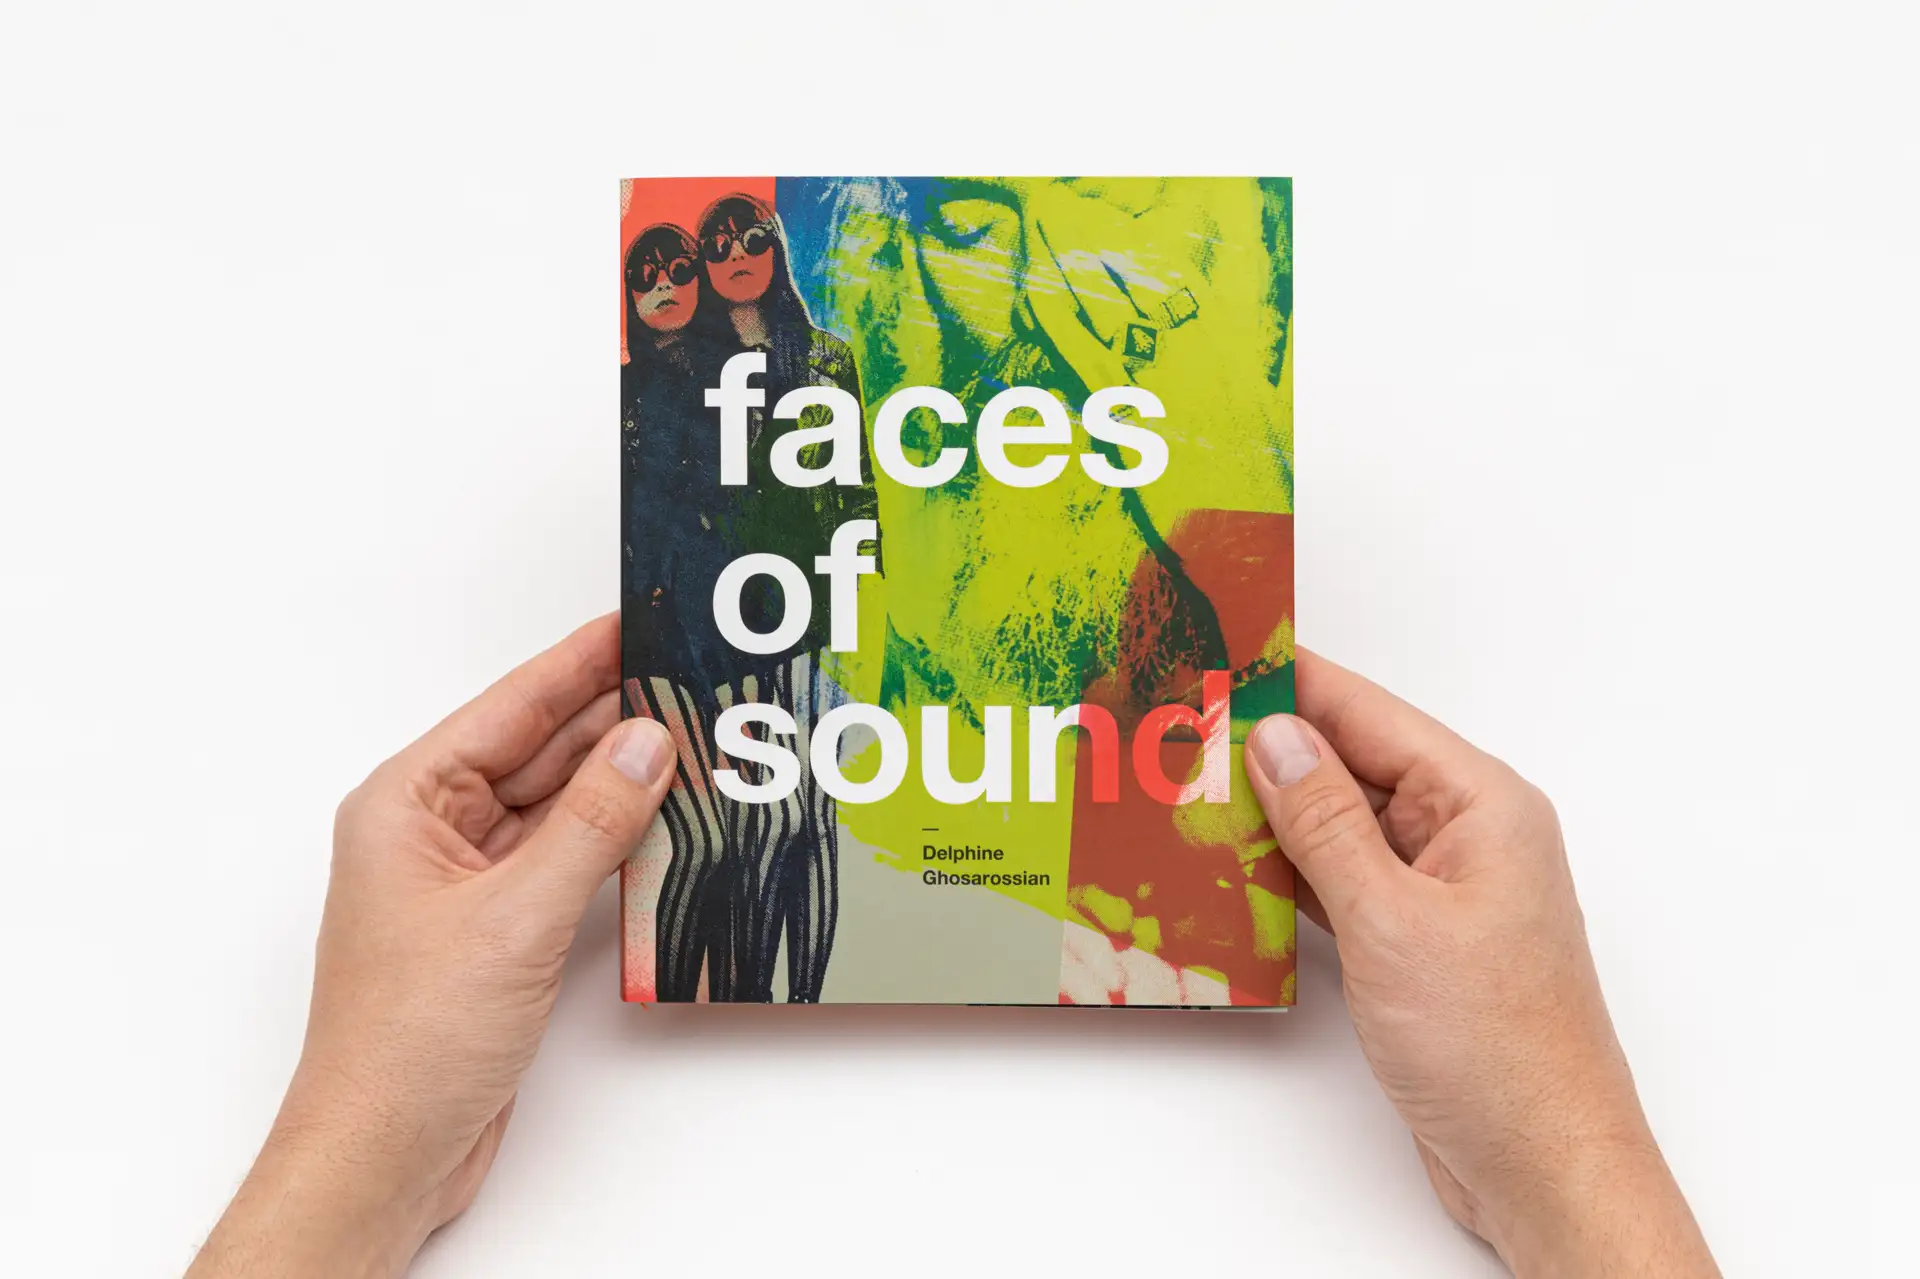 Image presenting the project Faces of Sound